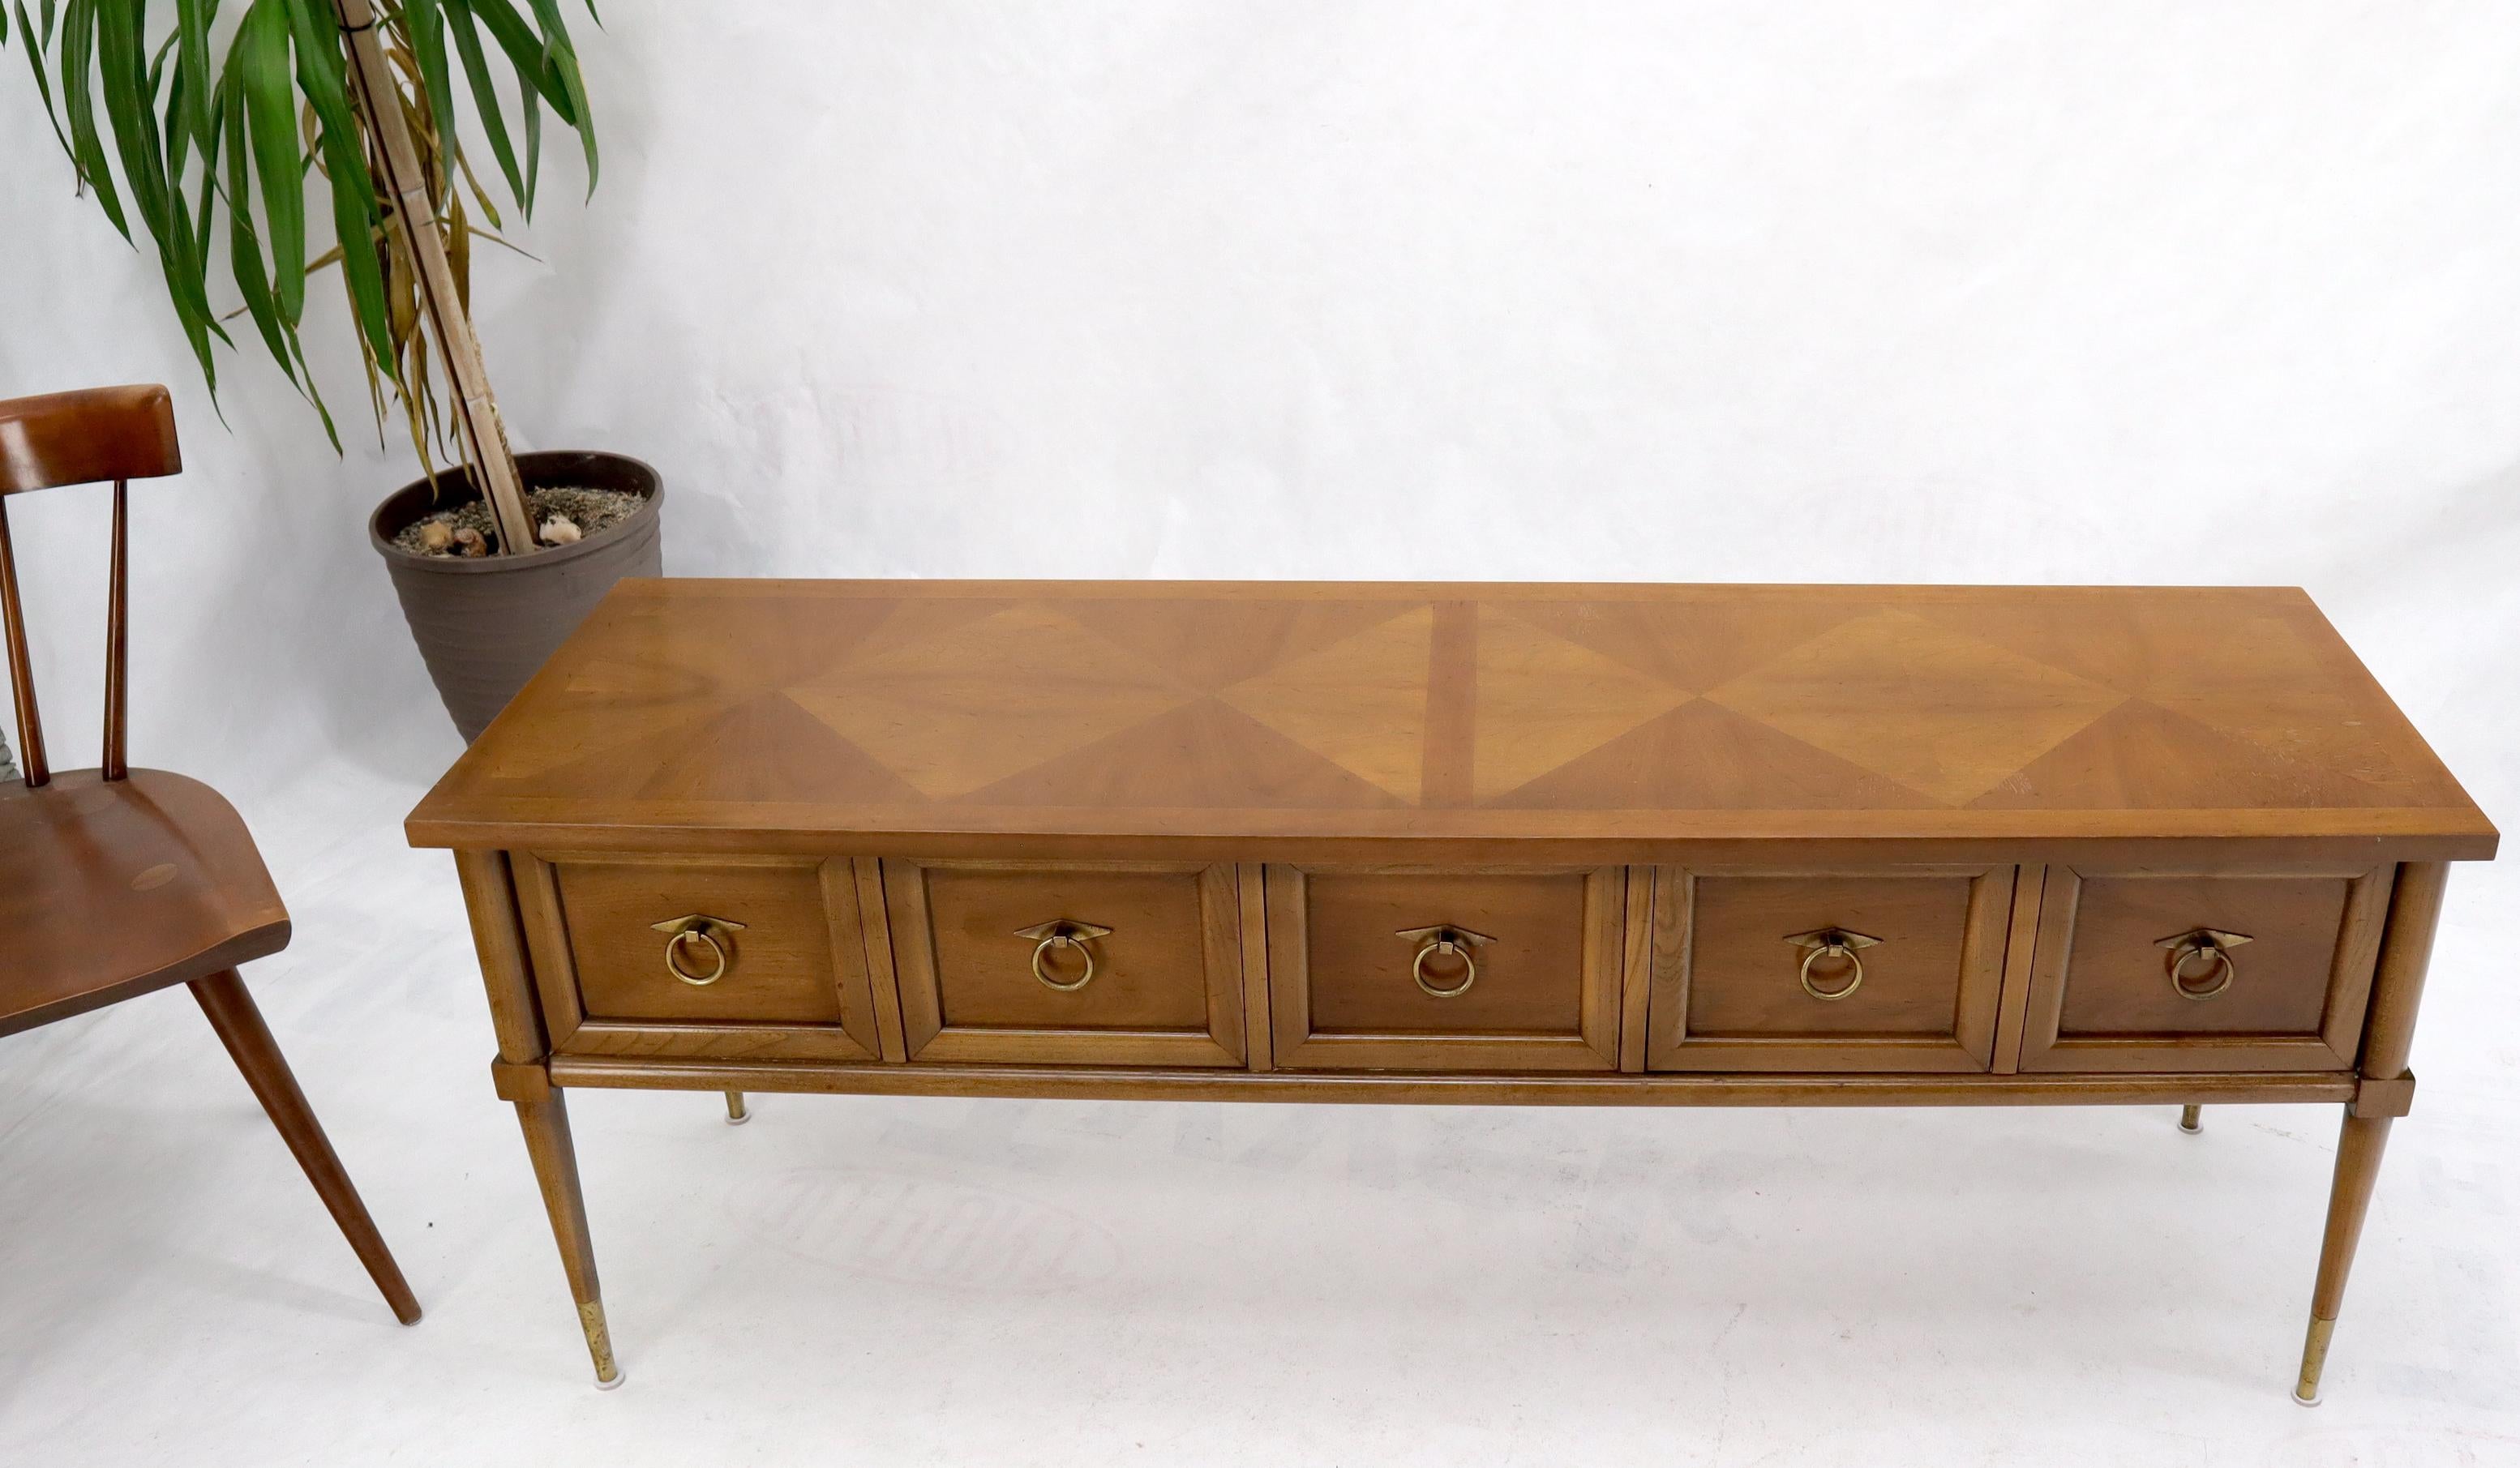 American Mid-Century Modern Long Low Profile Credenza with Round Ring Drop Pulls For Sale